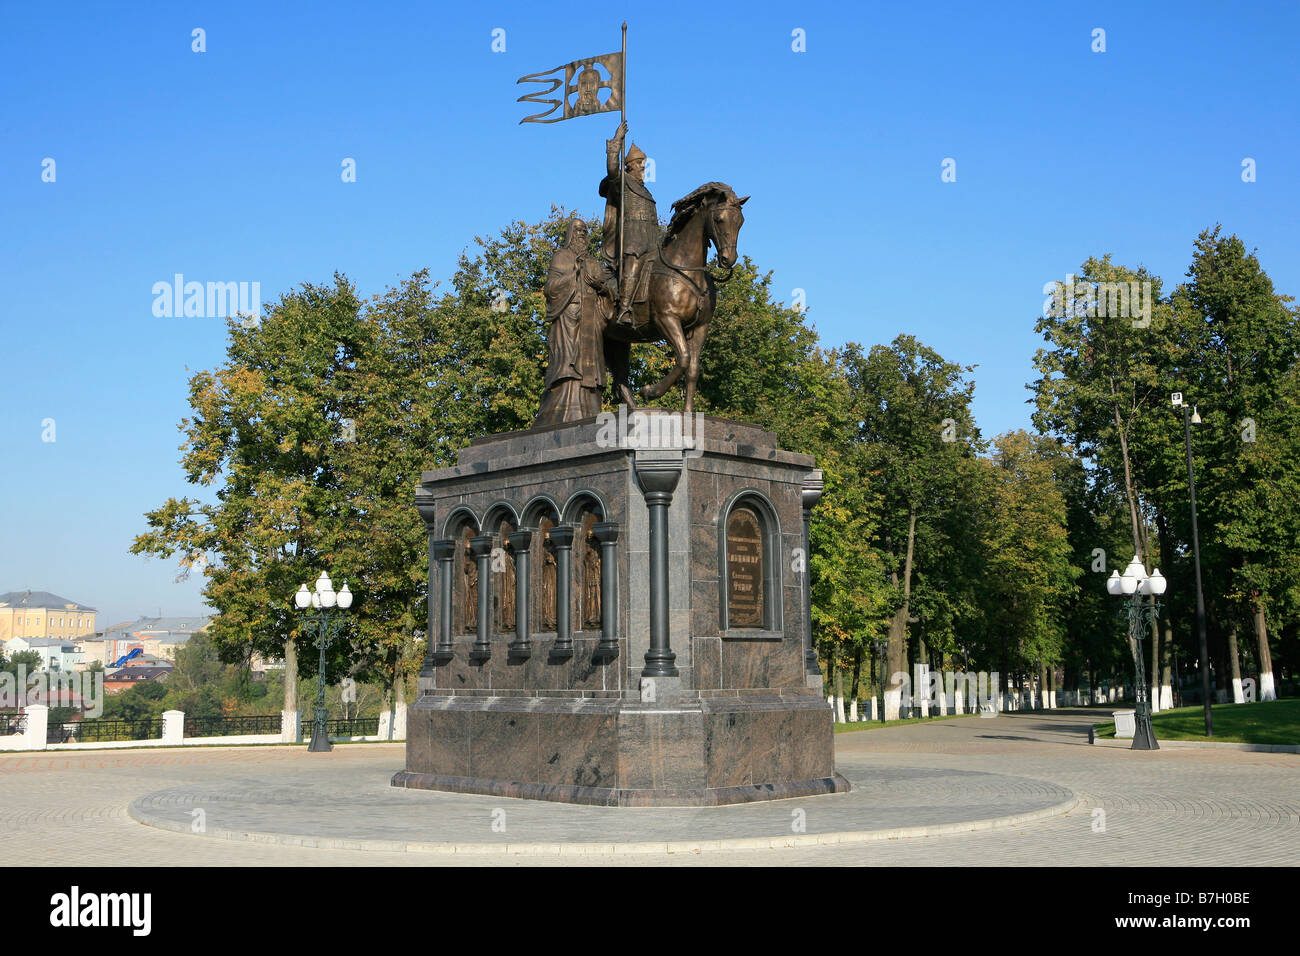 Equestrian monument to Grand Prince Vladimir II Monomakh (1053-1125) founder of the city of Vladimir, Russia Stock Photo